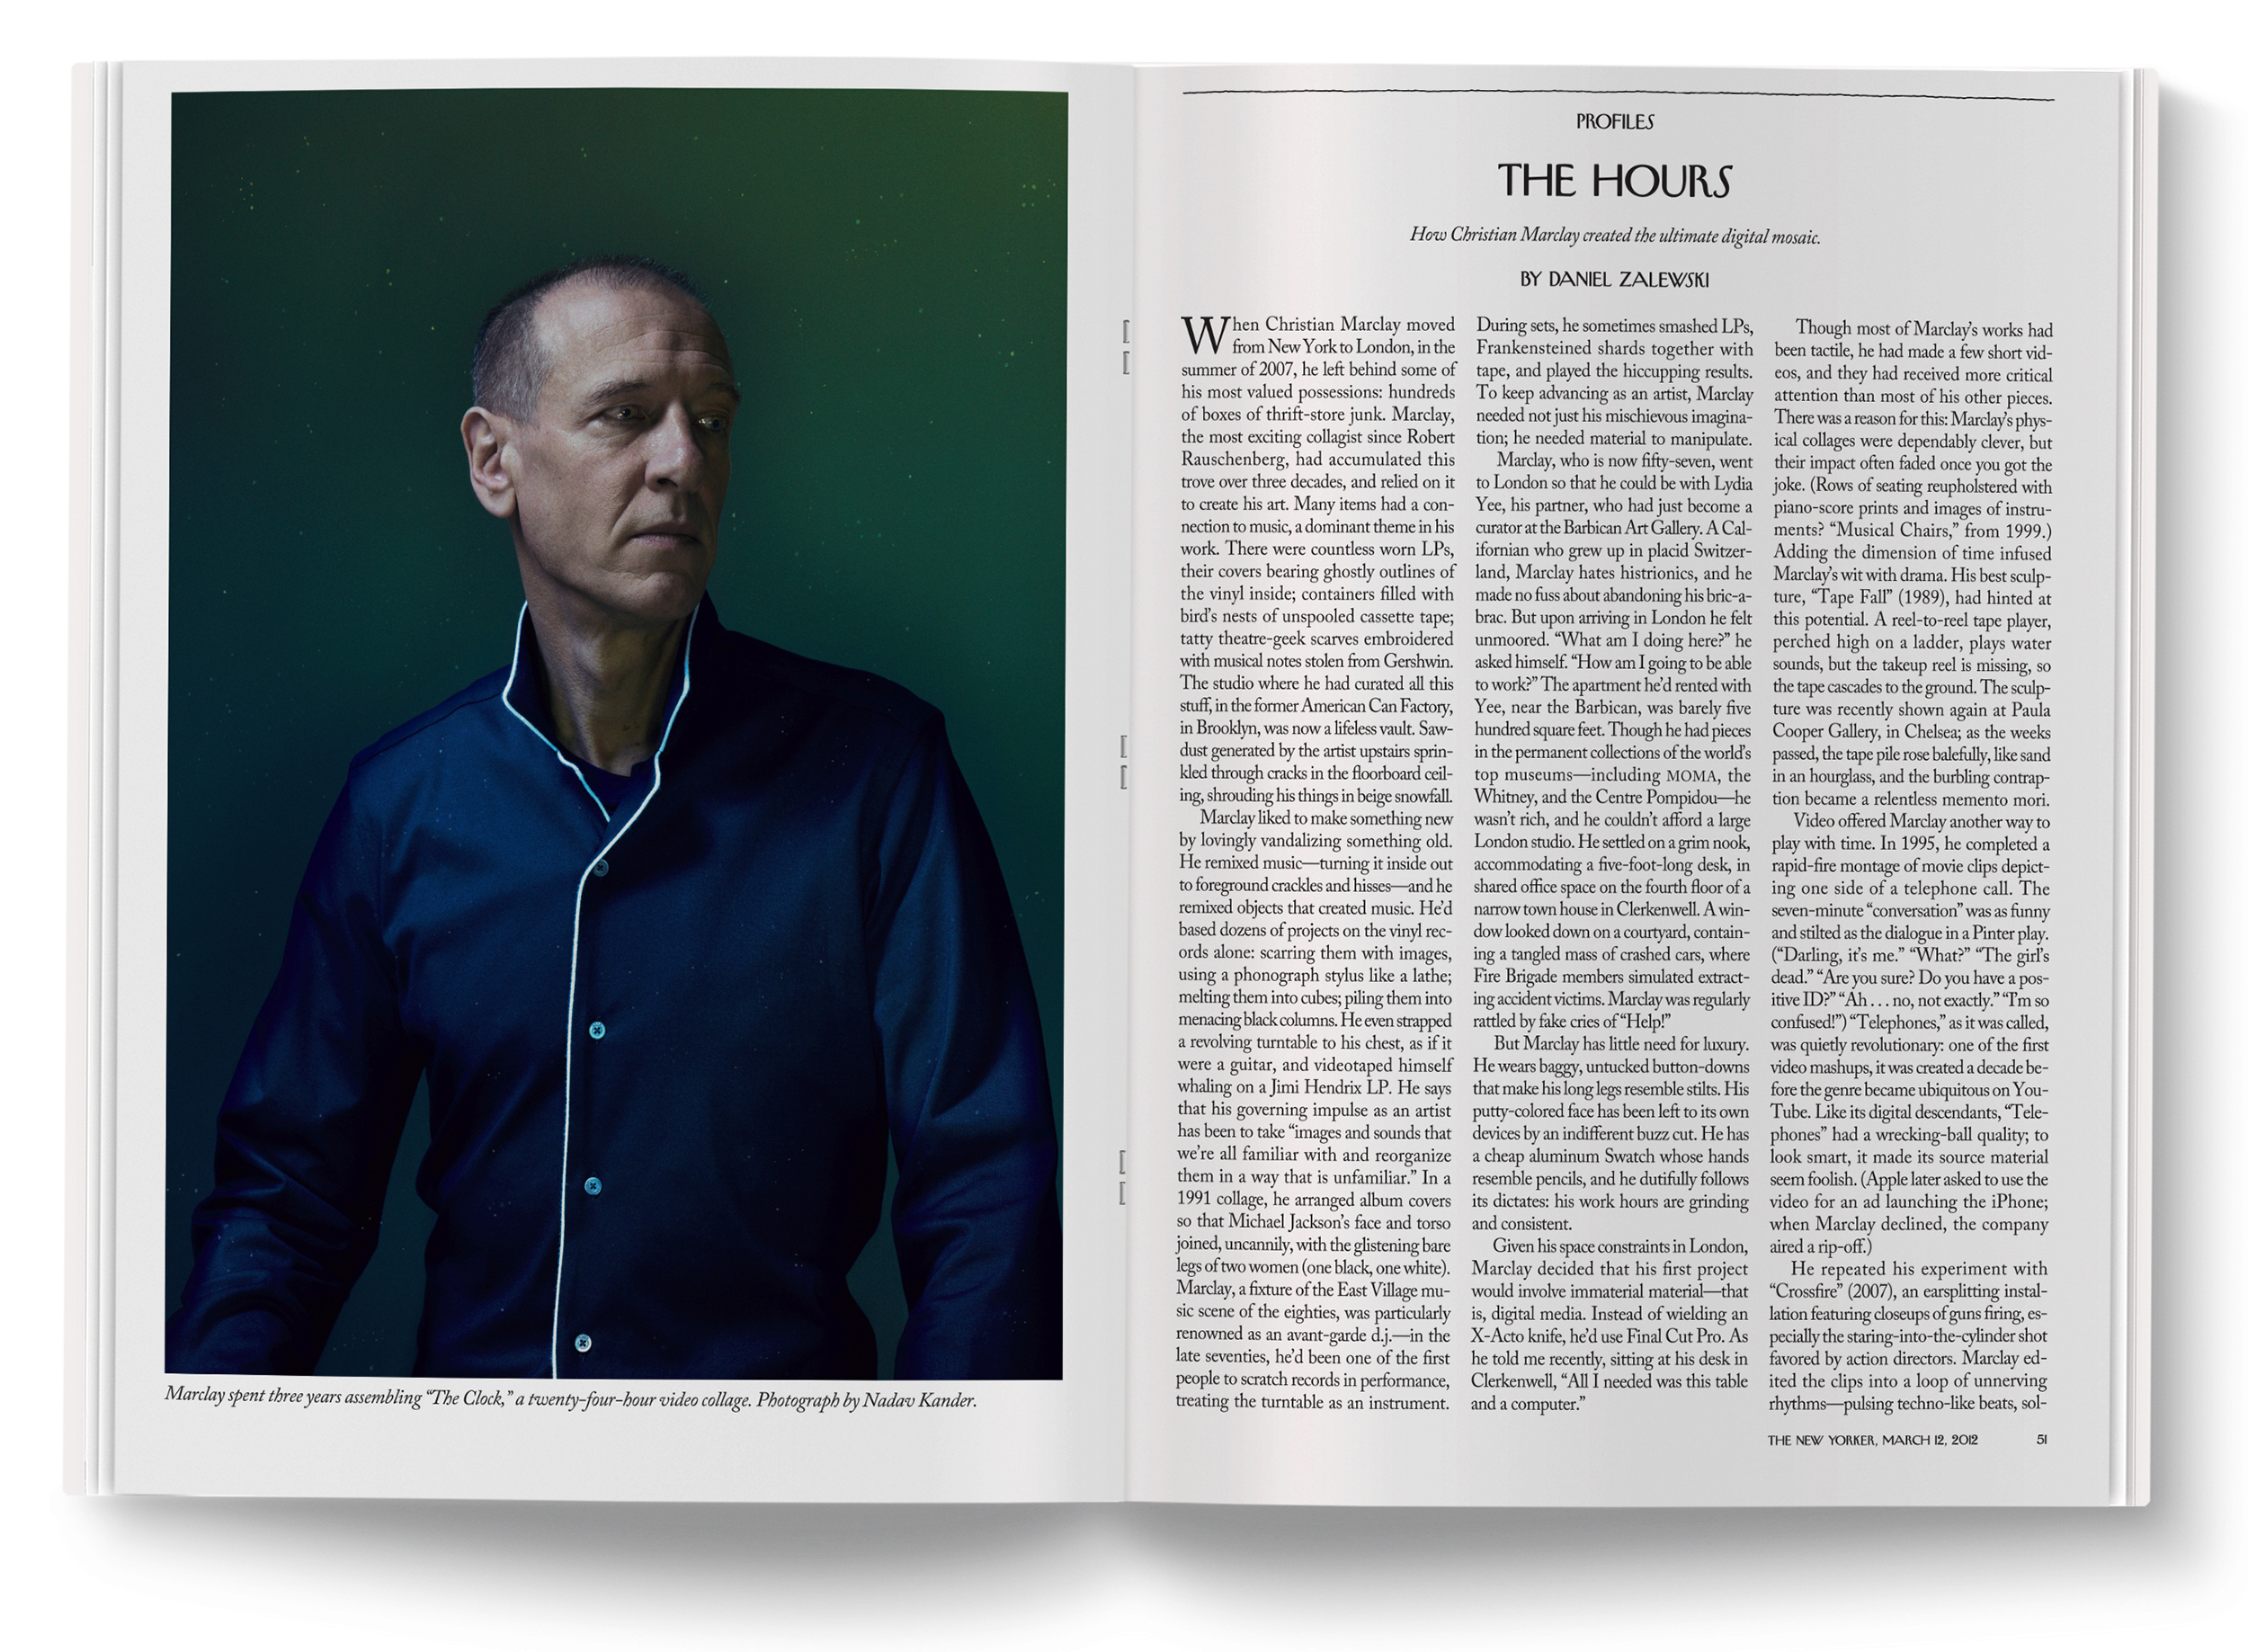   Christian Marclay  photographed by  Nadav Kander . 